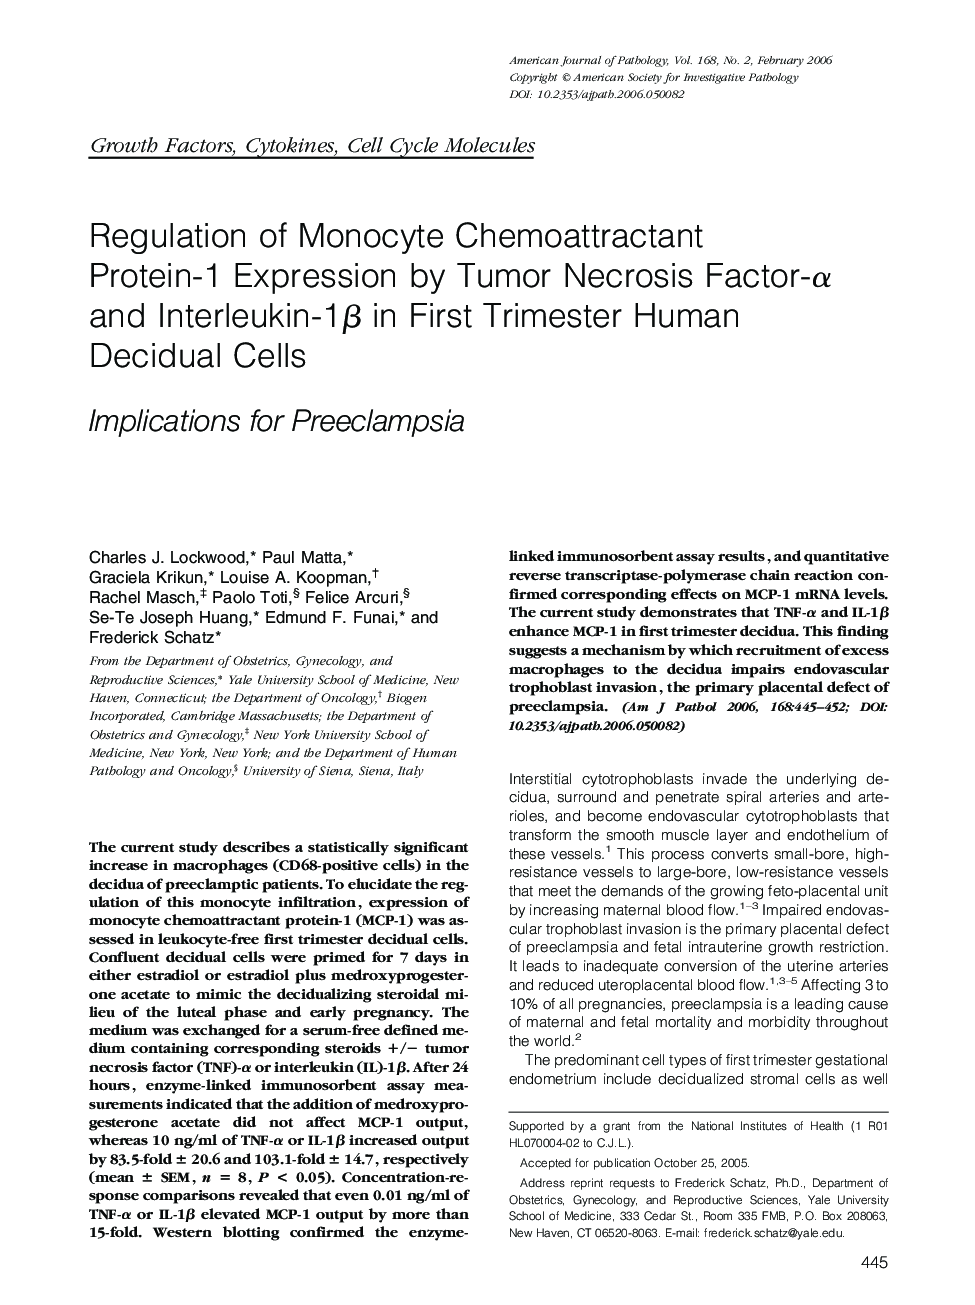 Regular ArticlesRegulation of Monocyte Chemoattractant Protein-1 Expression by Tumor Necrosis Factor-Î± and Interleukin-1Î² in First Trimester Human Decidual Cells: Implications for Preeclampsia